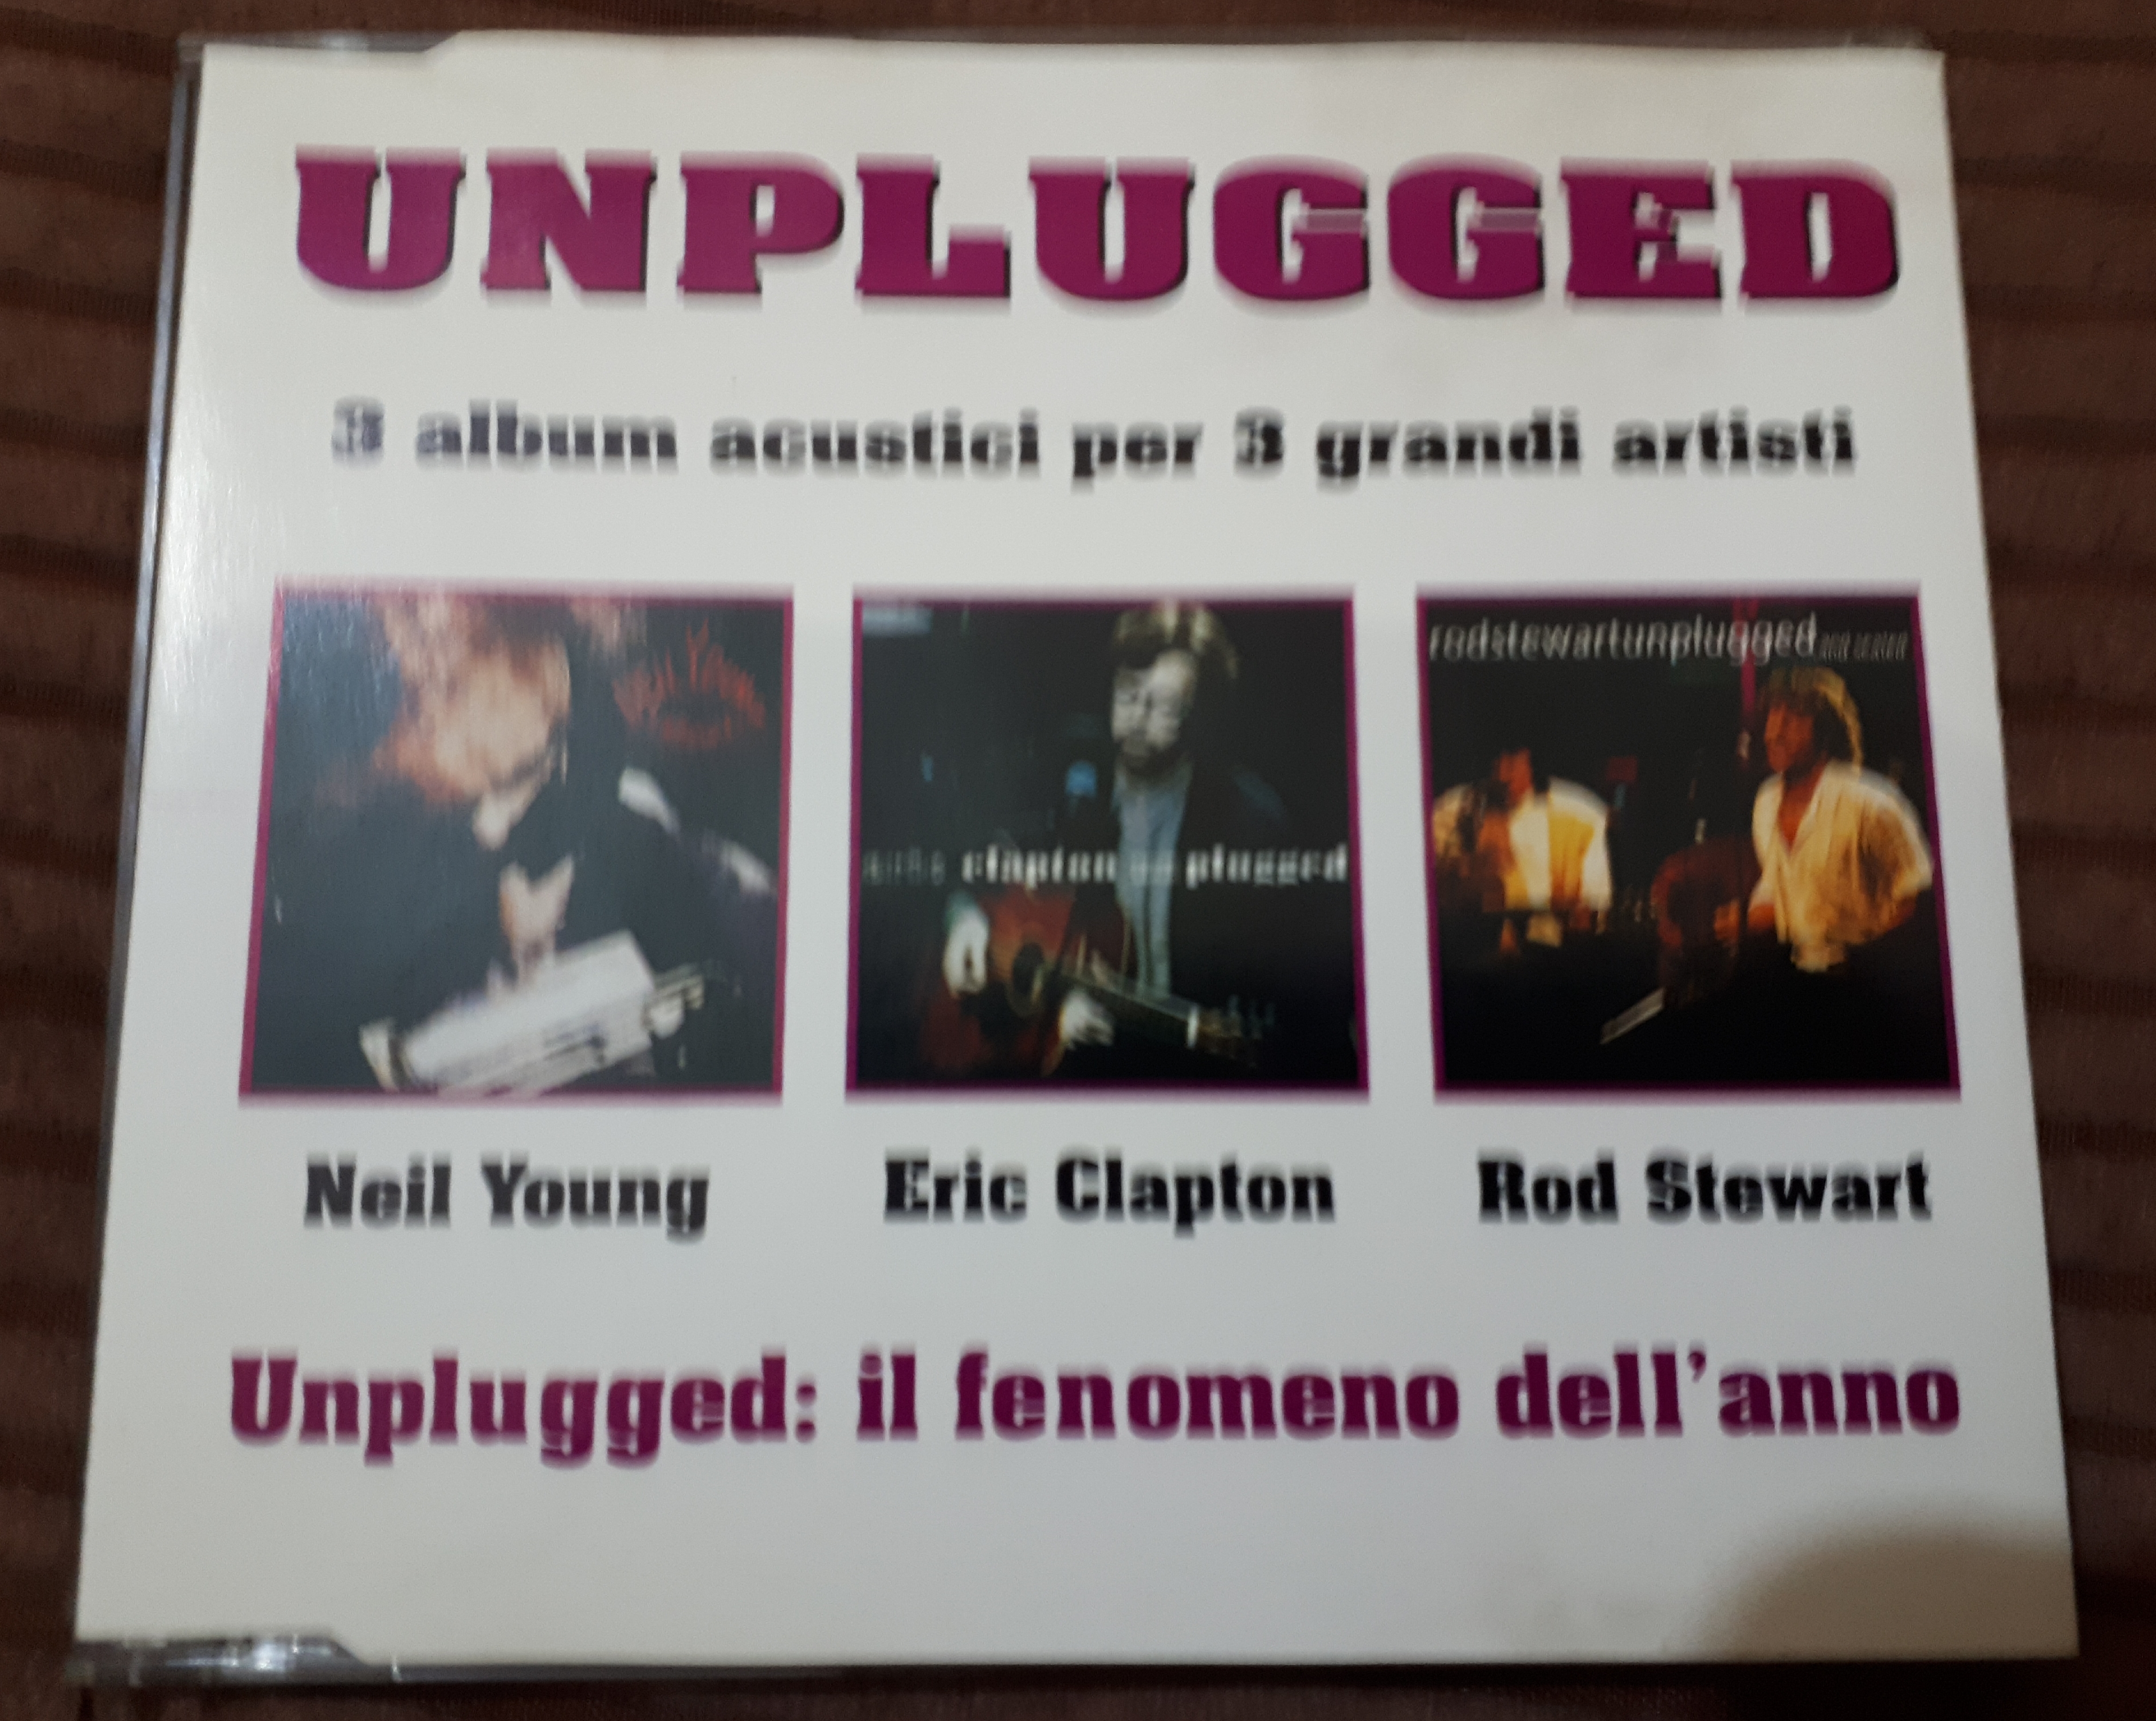 Neil Young / Eric Clapton / Rod Stewart - Unplugged